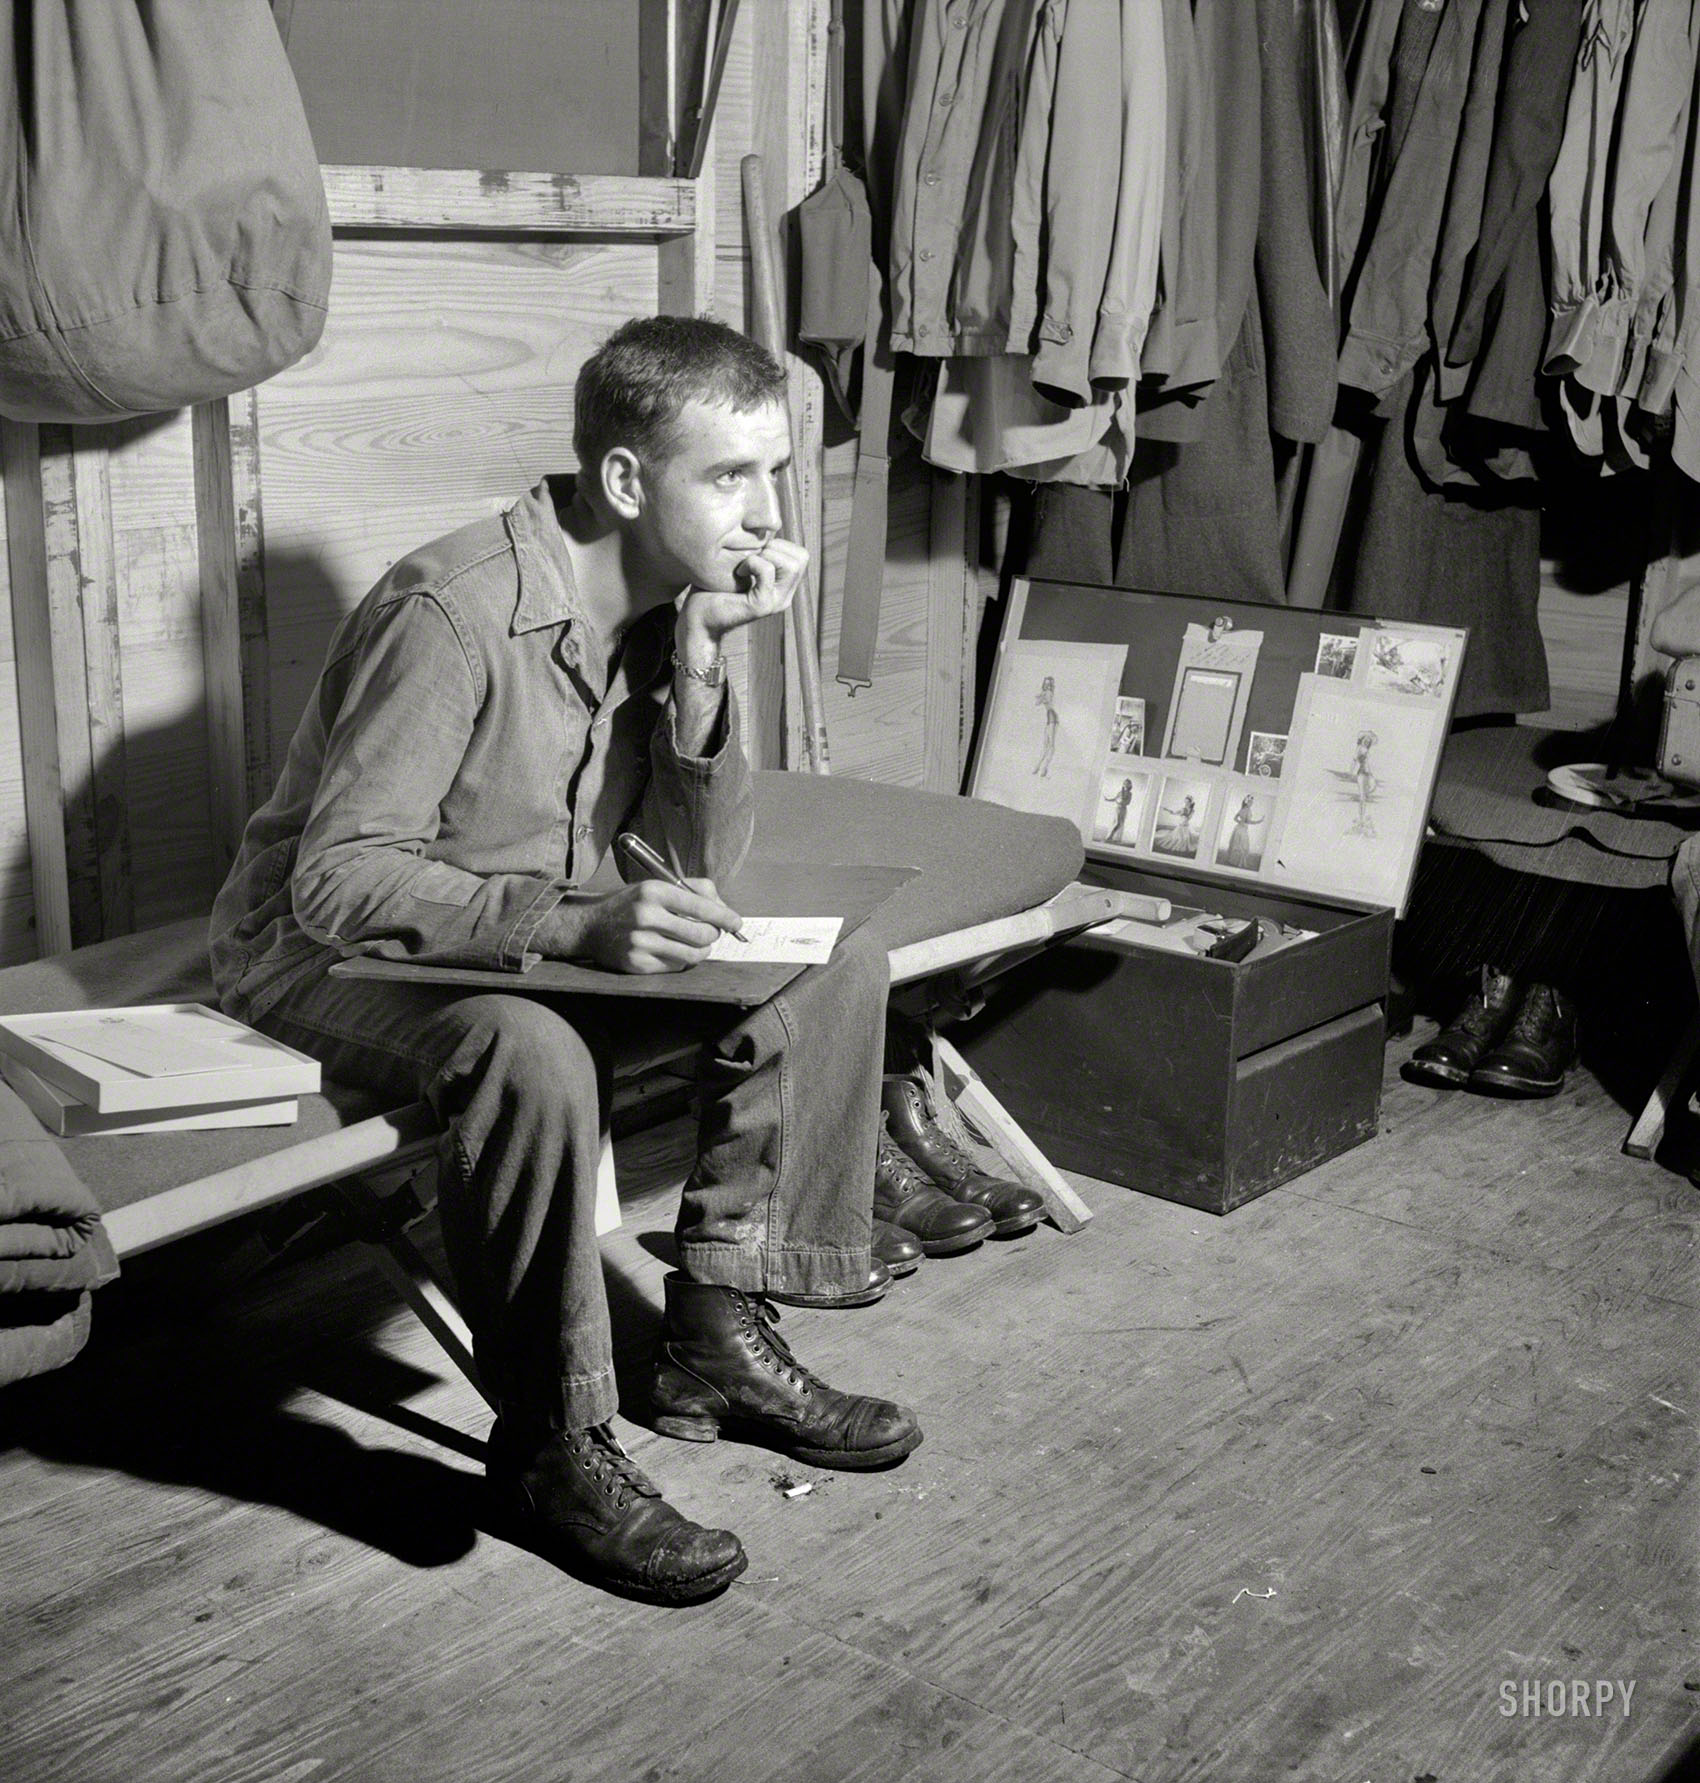 July 1943. "Greenville, South Carolina. Air Service Command. Writing a letter home." Photo by Jack Delano for the Office of War Information. View full size.